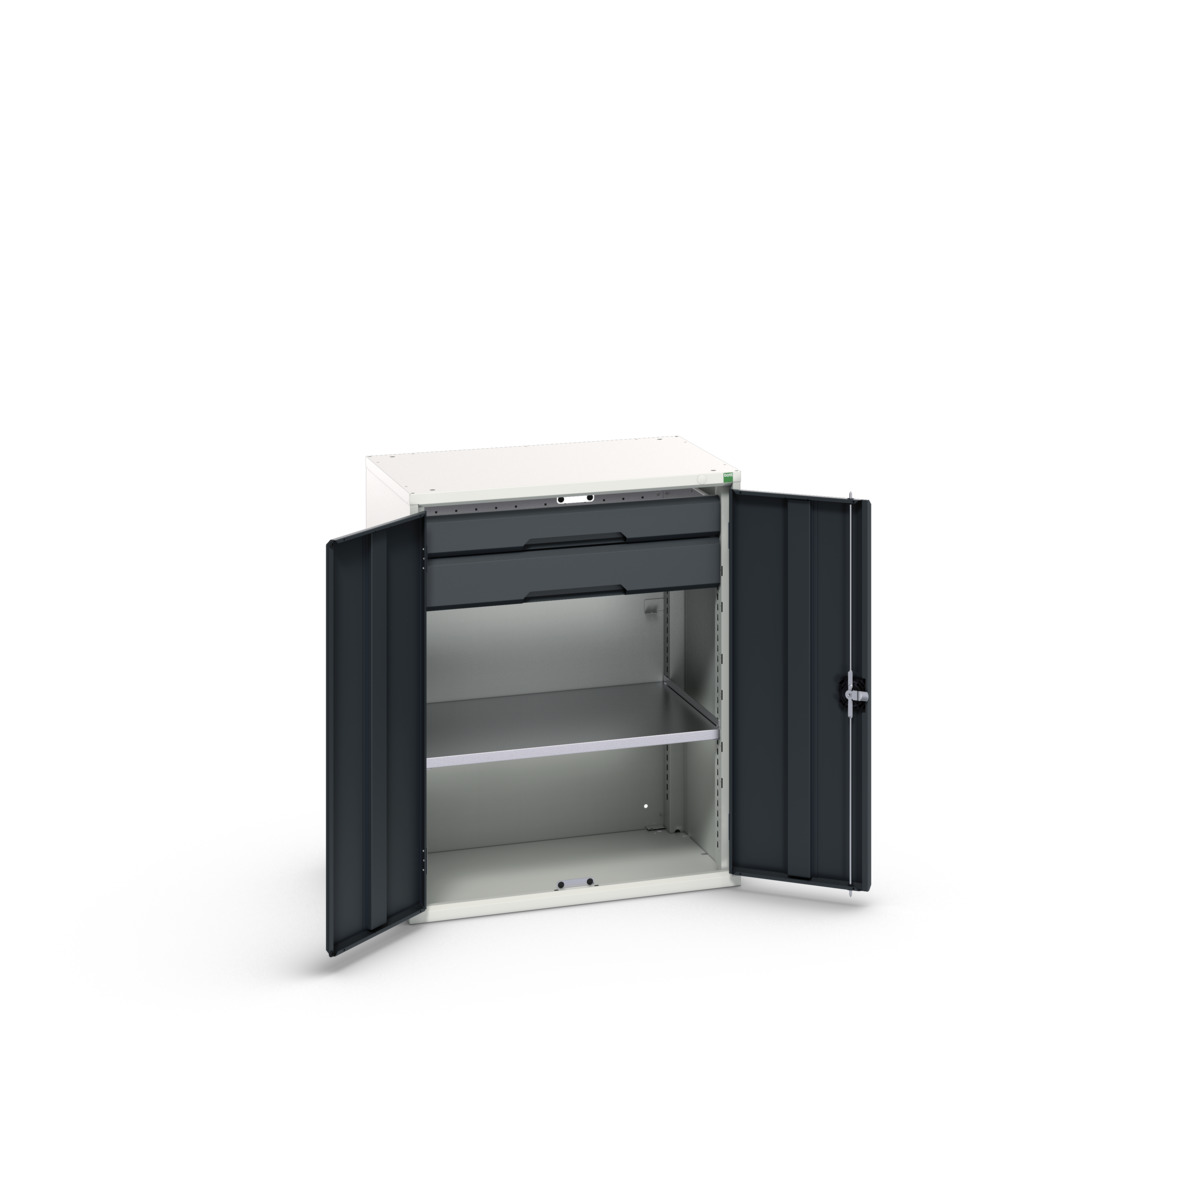 16926453.19 - verso kitted cupboard